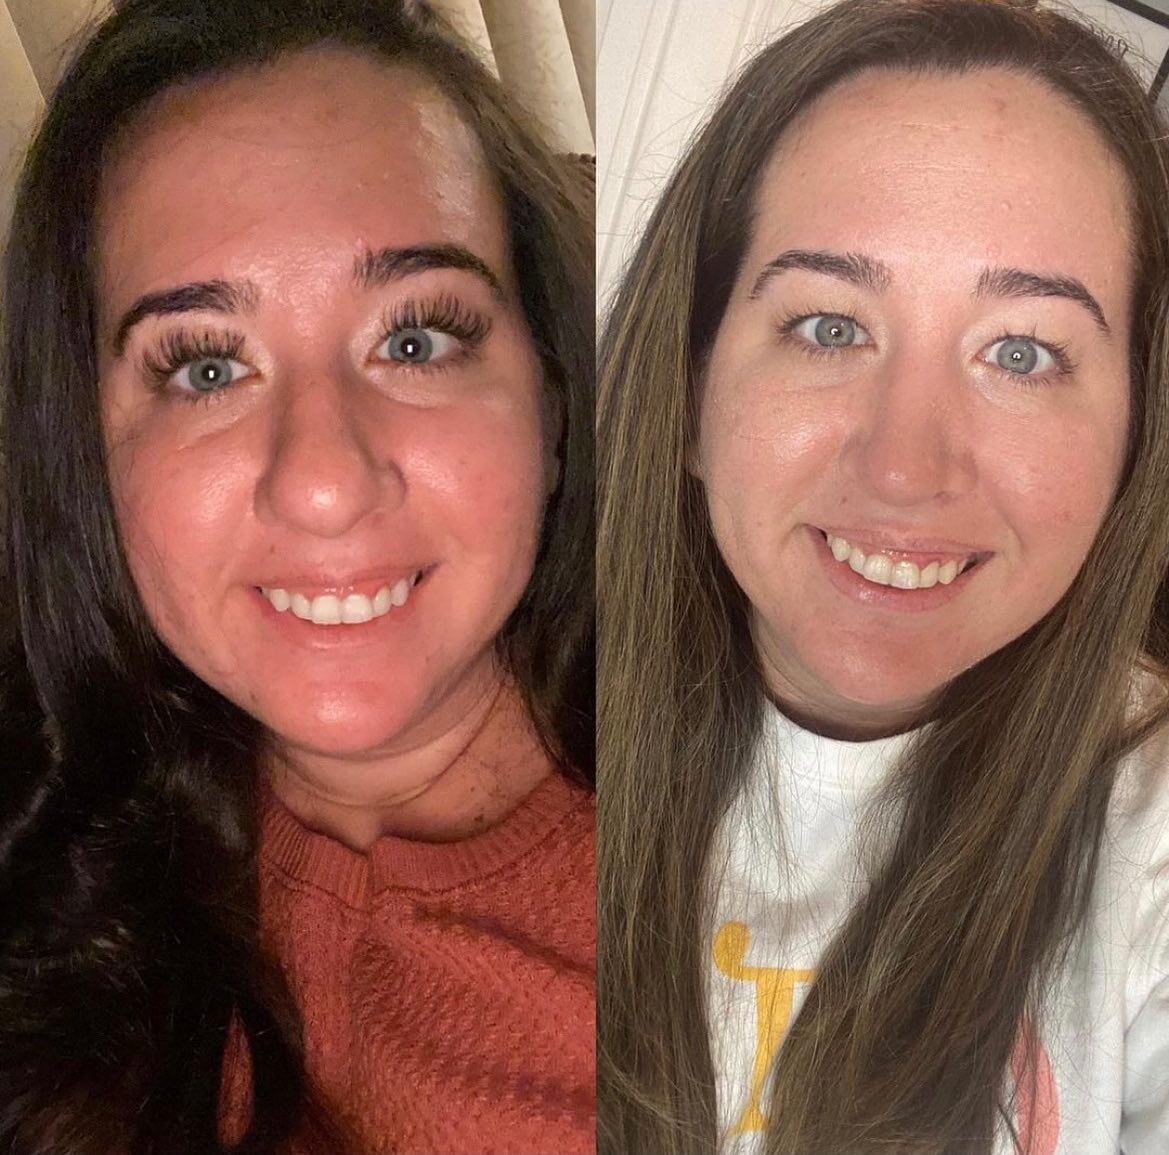 &ldquo;4 week post op! Surprise! New me, new nose! Do what makes you happy in this life because life is too short! To think my nose is still going to improve over the next 6-12 months blows my mind. I am so happy already with the results from @drtobi